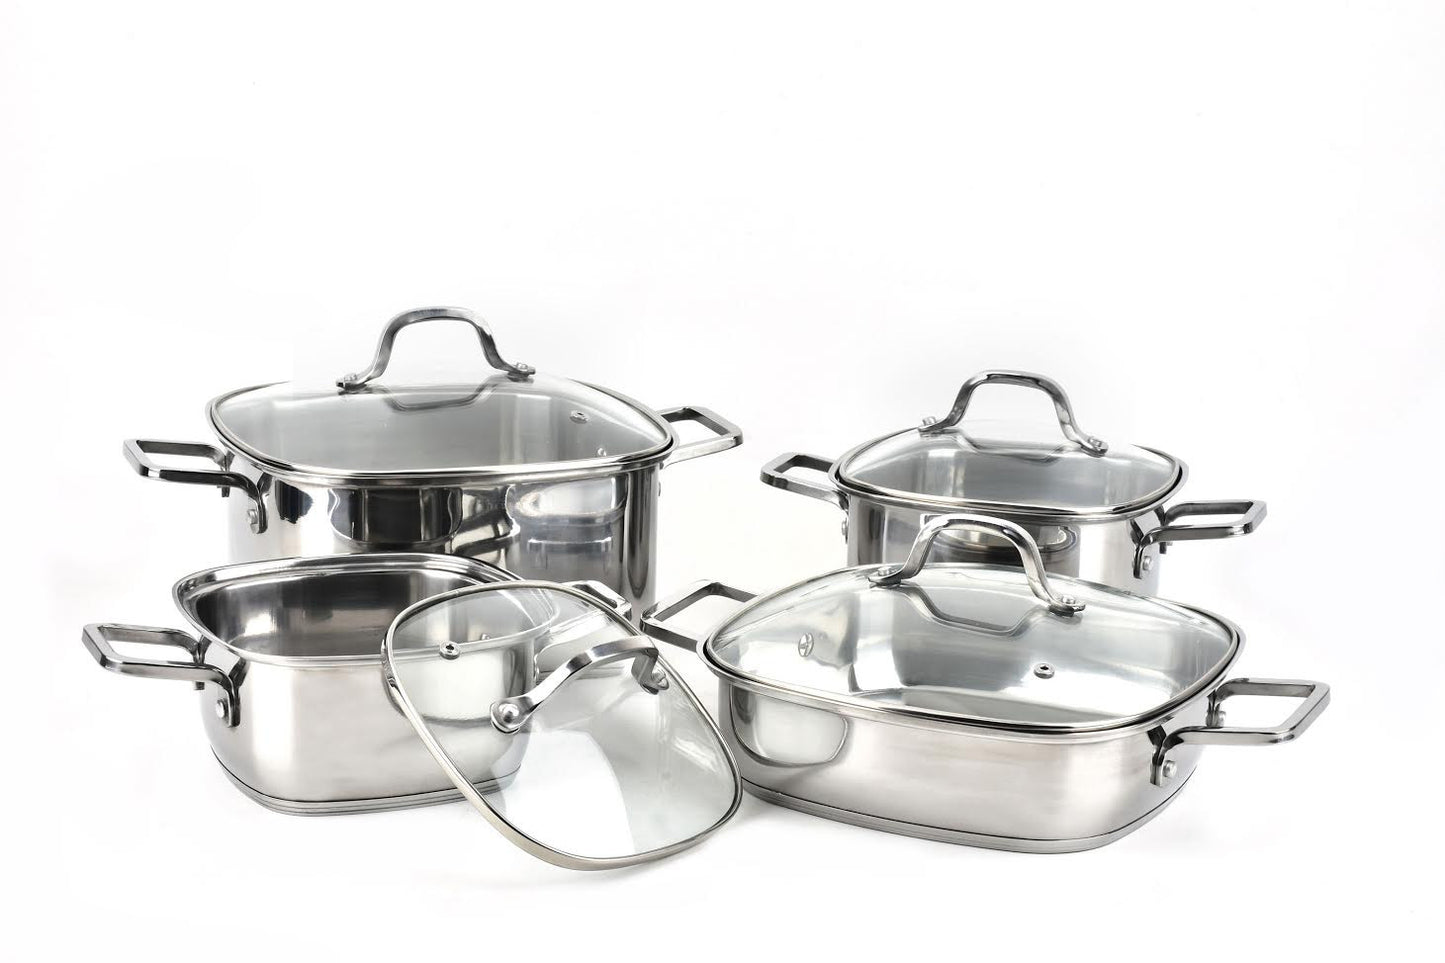 8 PC Stainless Steel 18/10 Cookware Set With Glass Lid